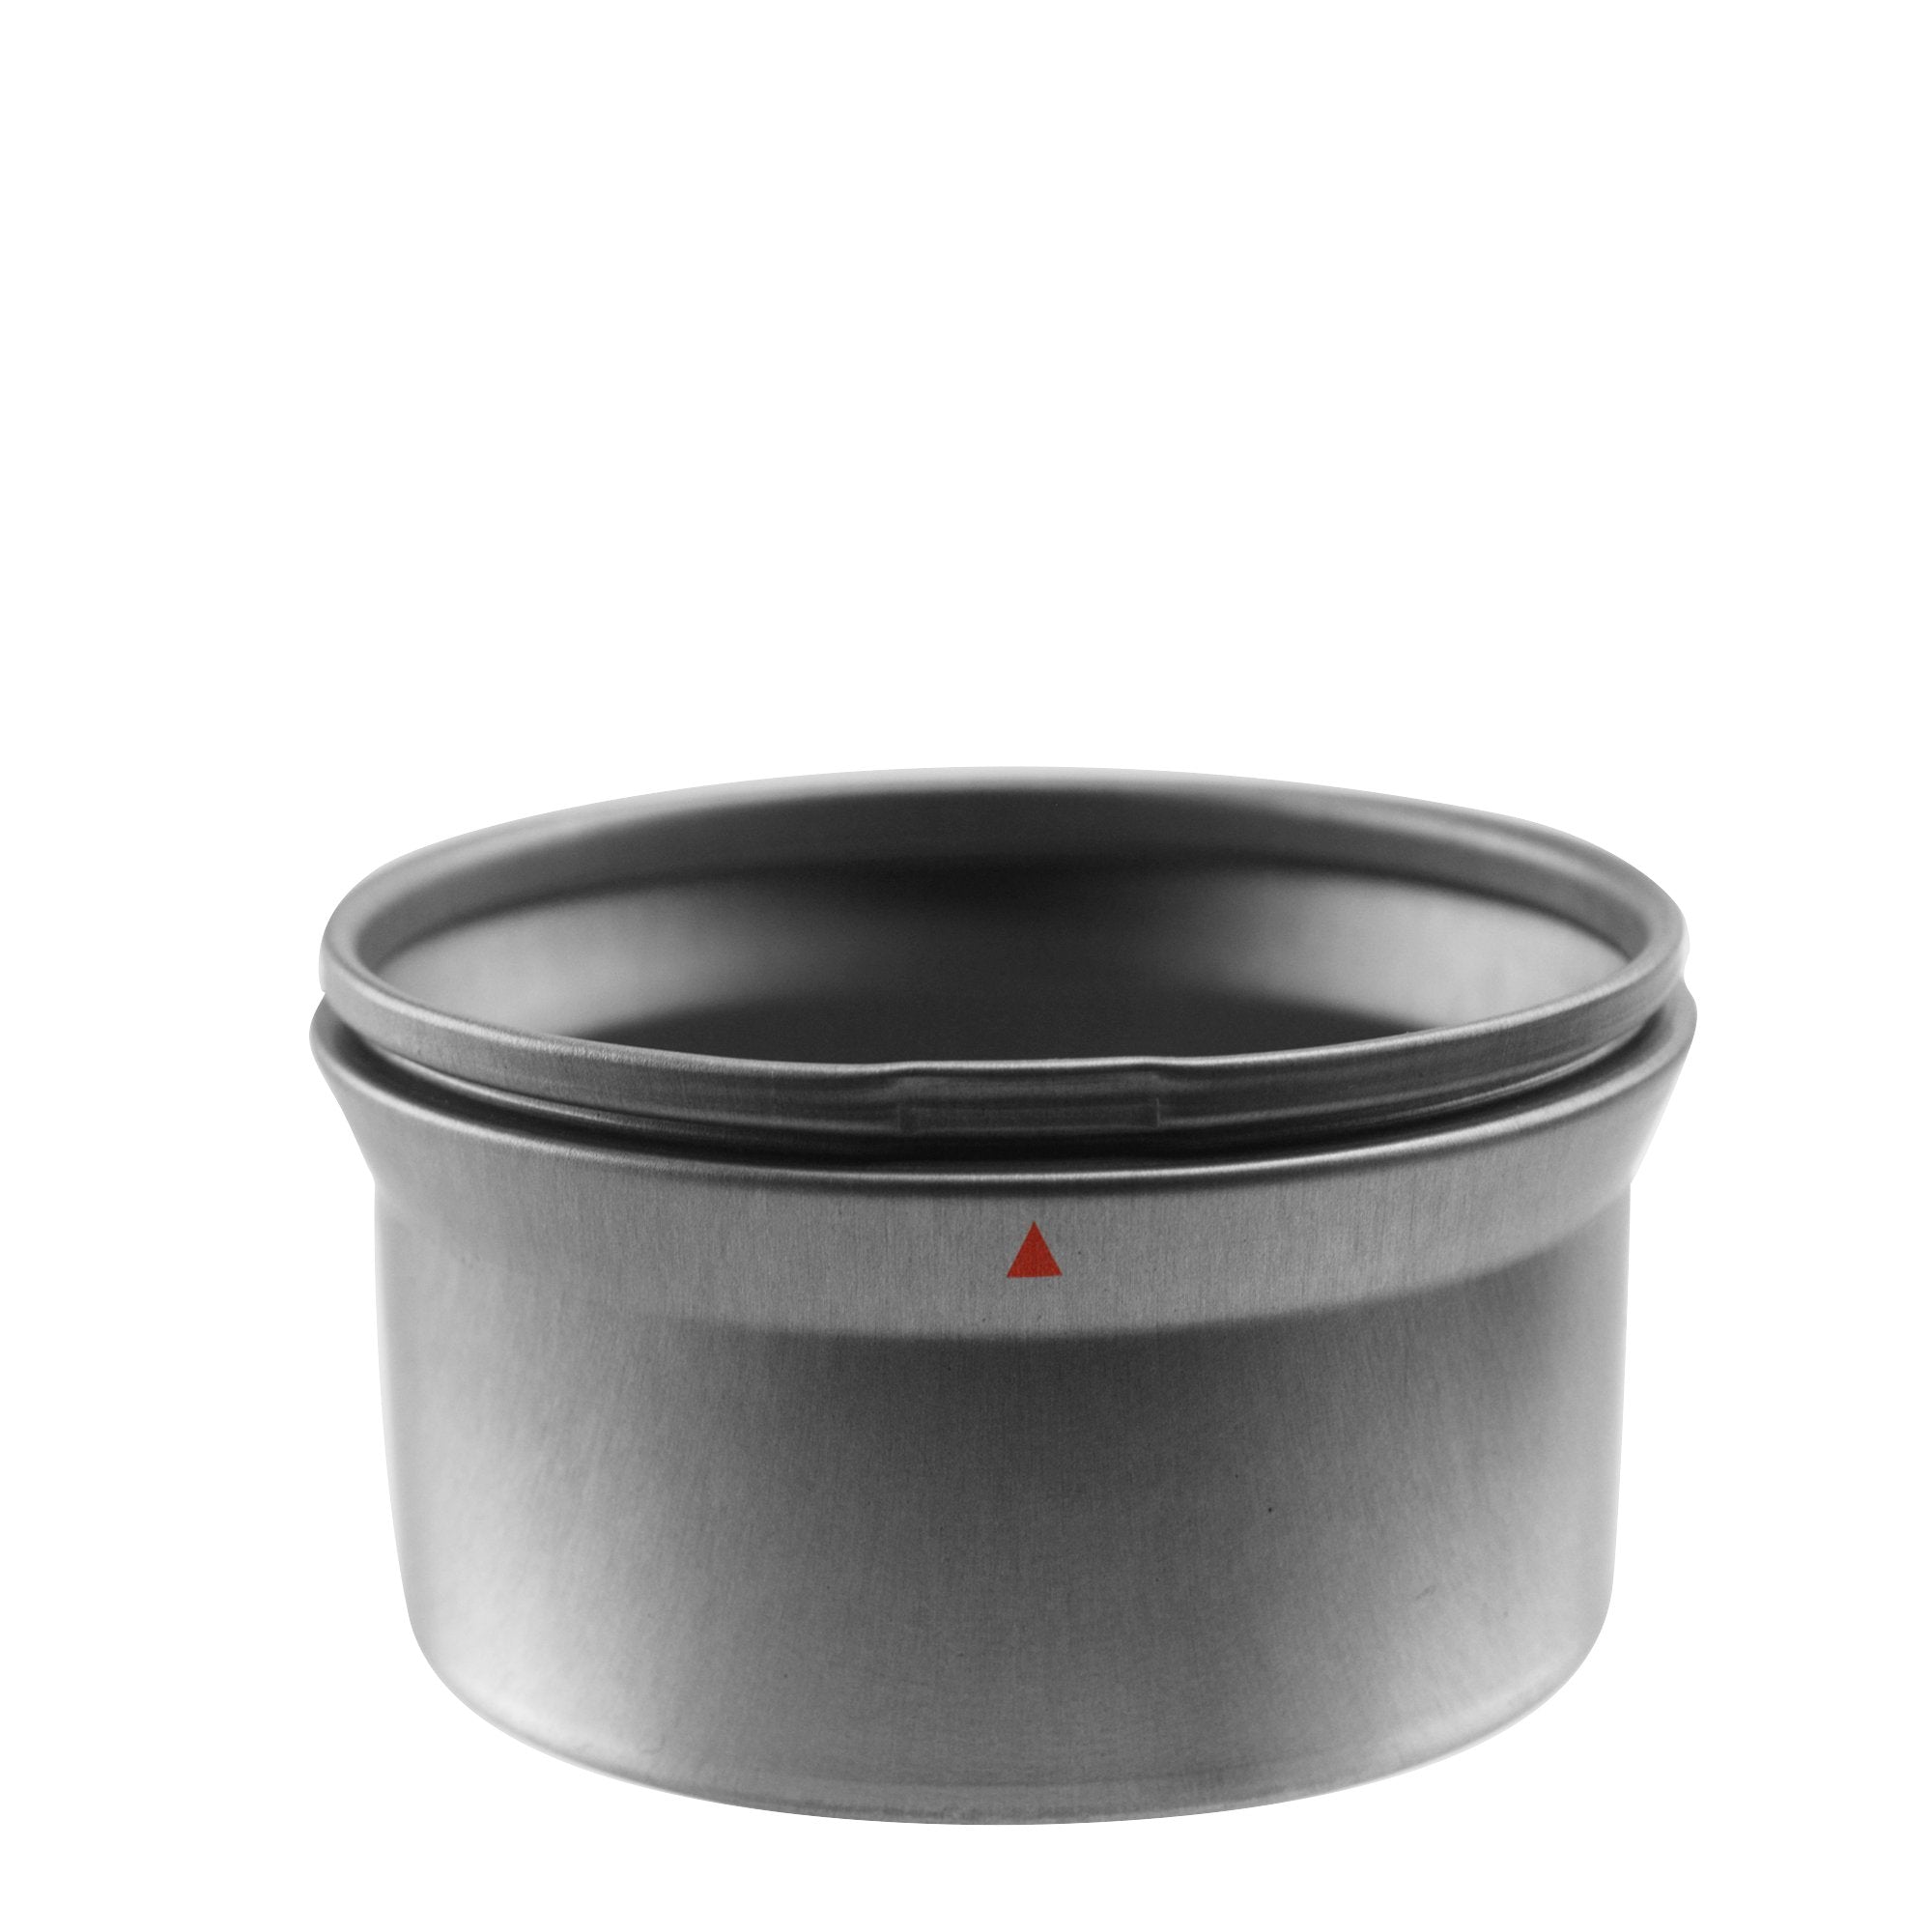 Child Resistant | Custom Safely Lock Sentinel Tin with Cap | Small and Medium - Brushed Metal - 6